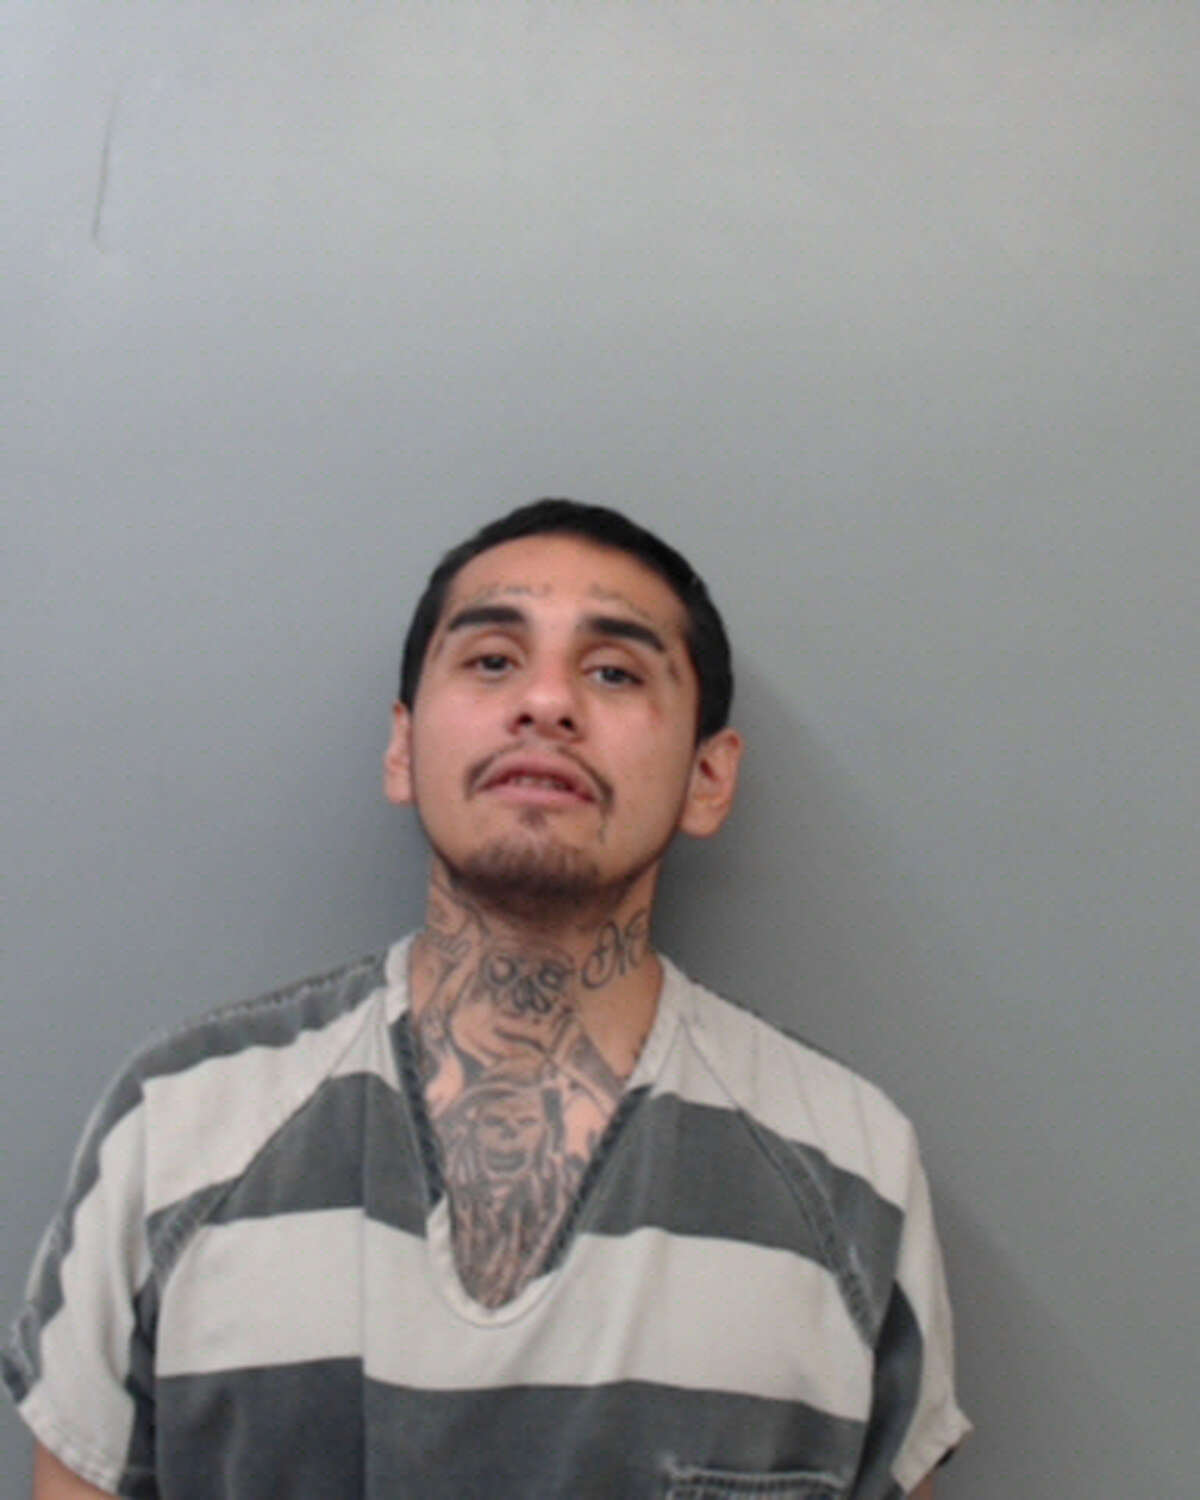 Pascual Cruz, 29, was charged him with burglary of a habitation with intent to commit aggravated assault.